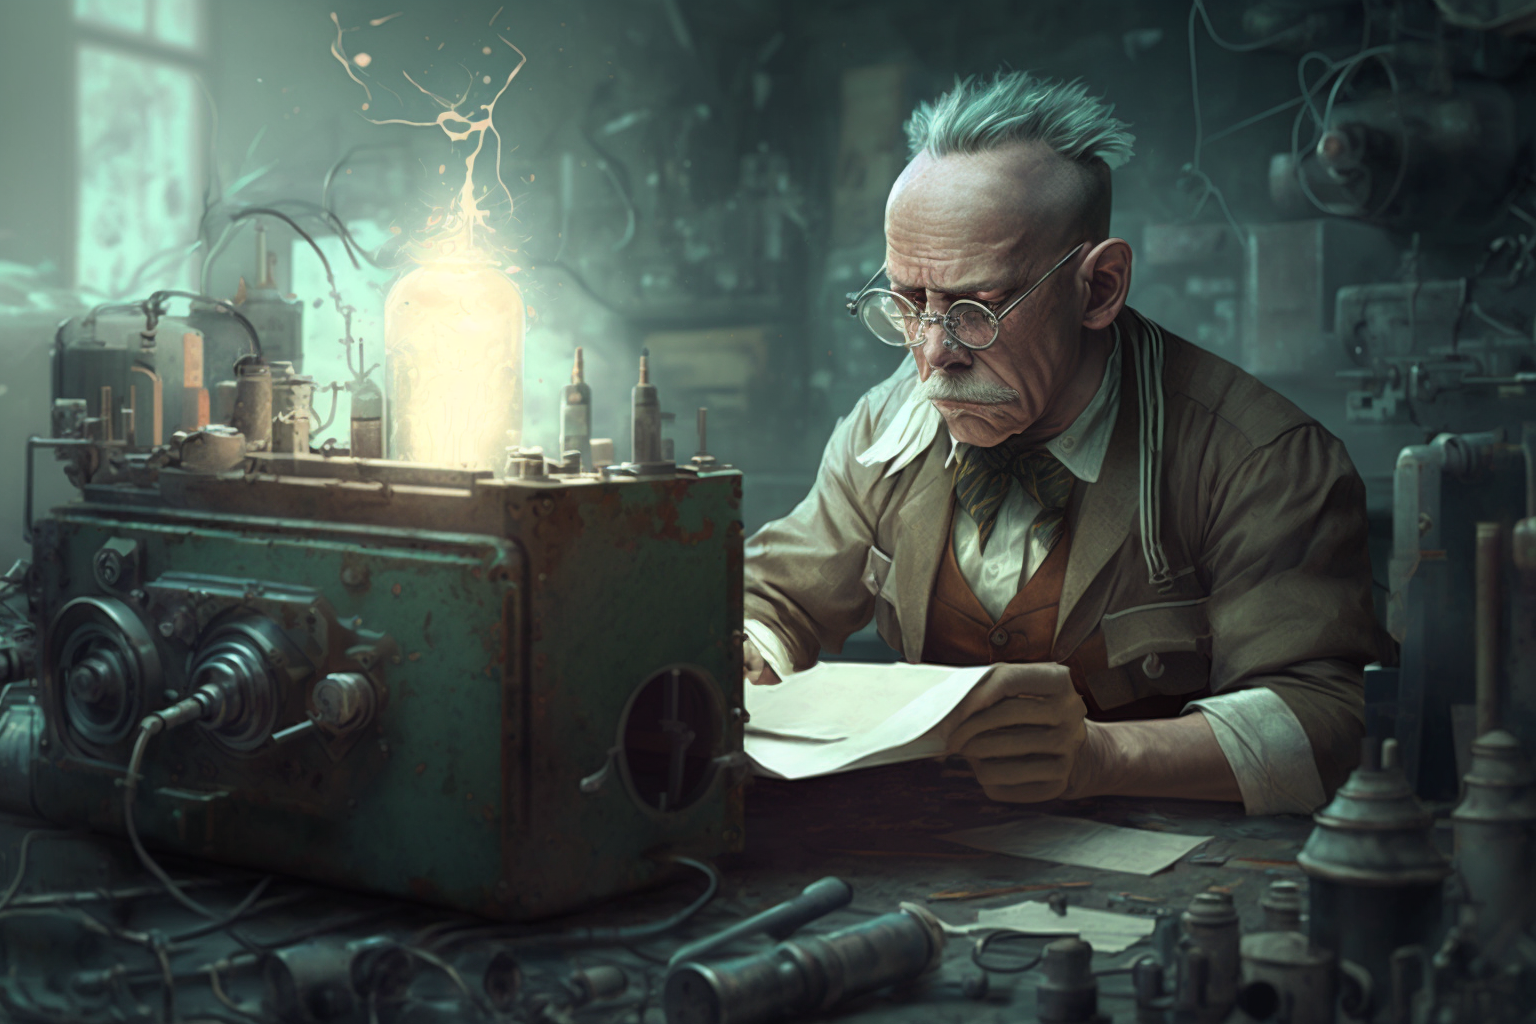 An older man with colored spiky hair and a suit reviews some paper coming out of an antique machine in a workshop